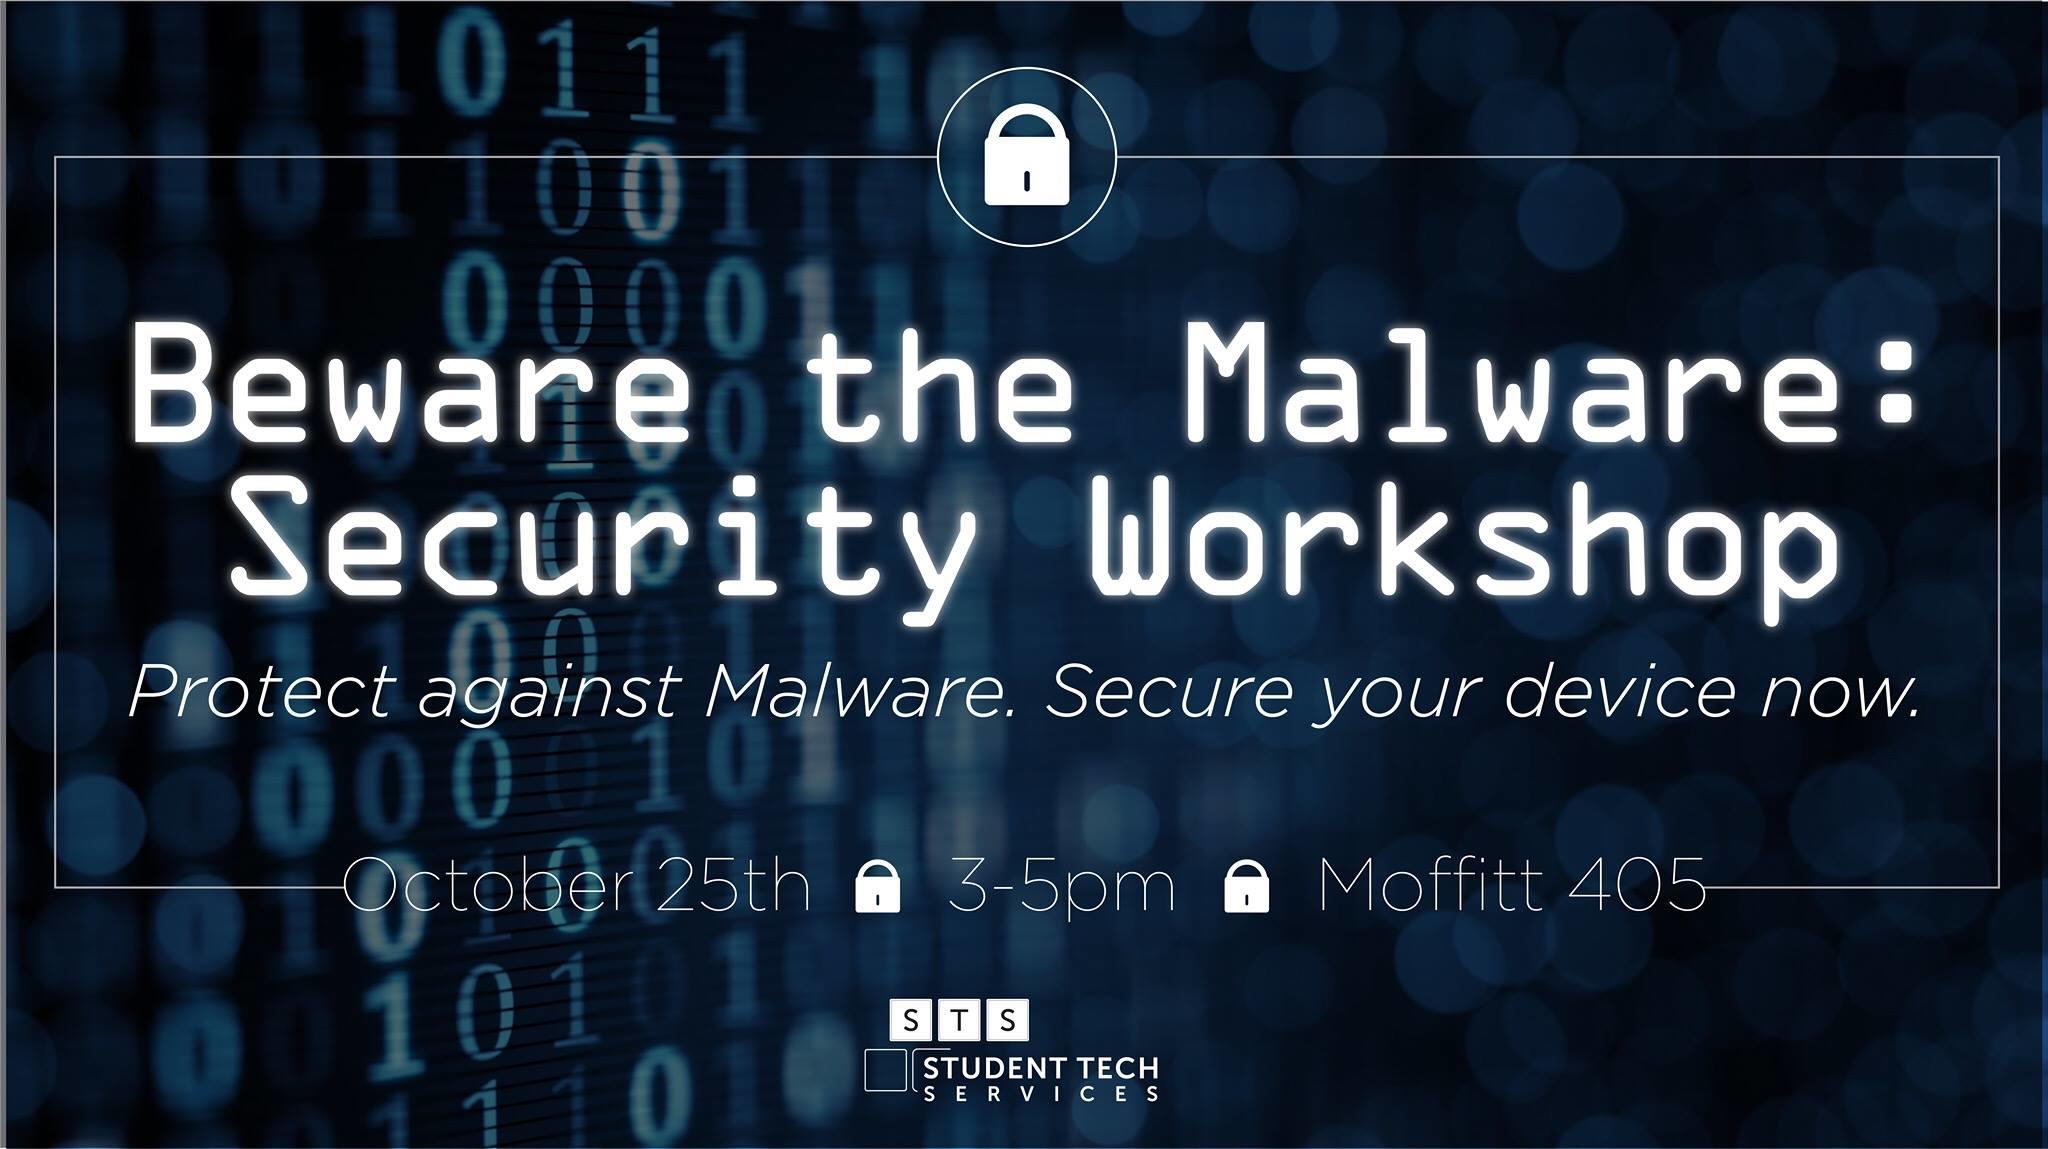  Security Workshop. Protect against malware, Secure your device now. October 25th 3-5pm Moffitt 405